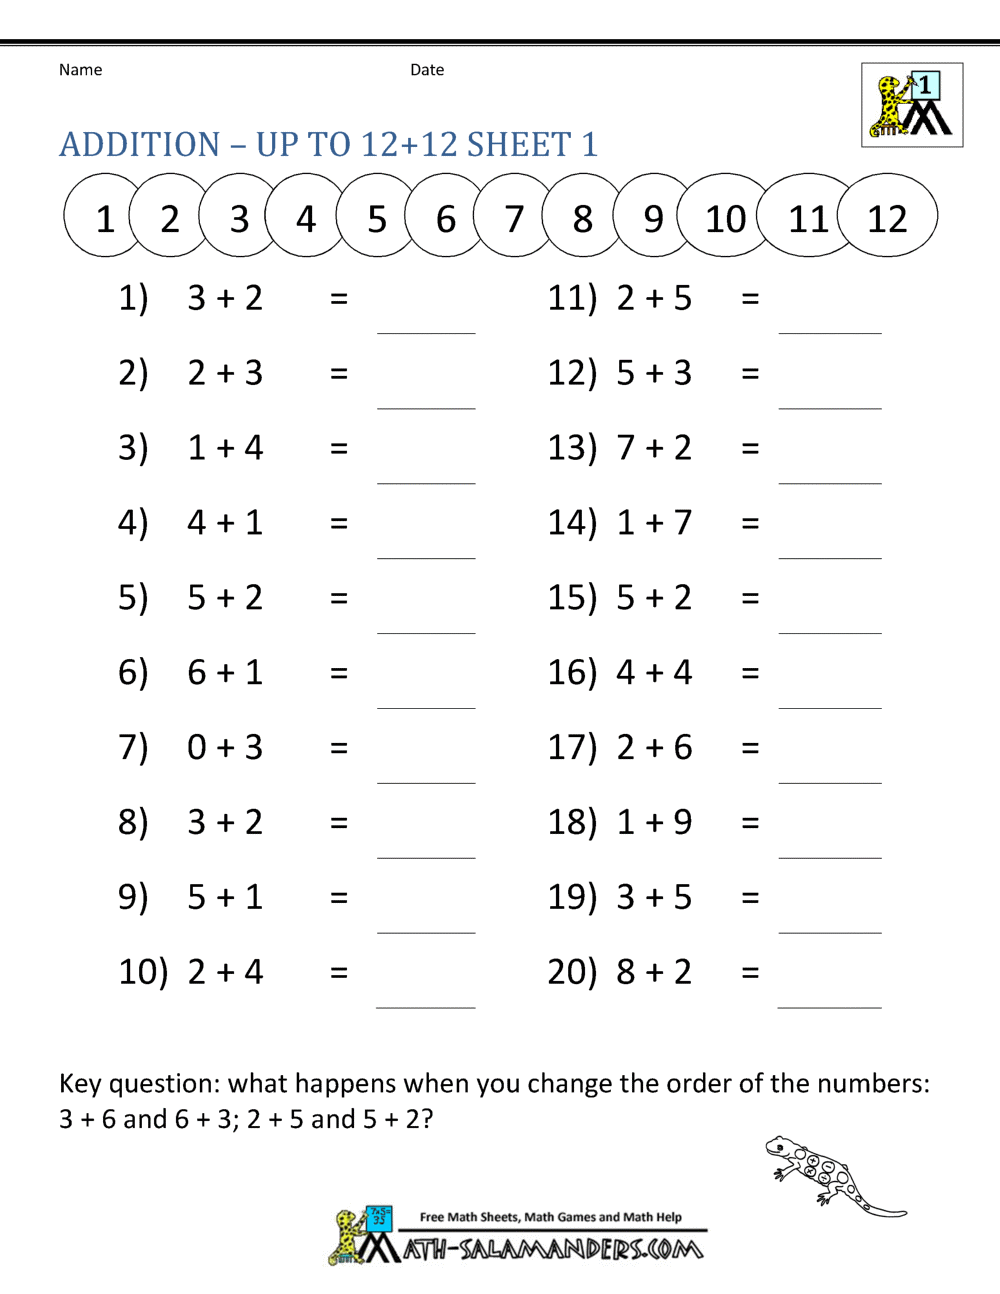 addition-problems-for-1st-grade-worksheets-worksheetscity